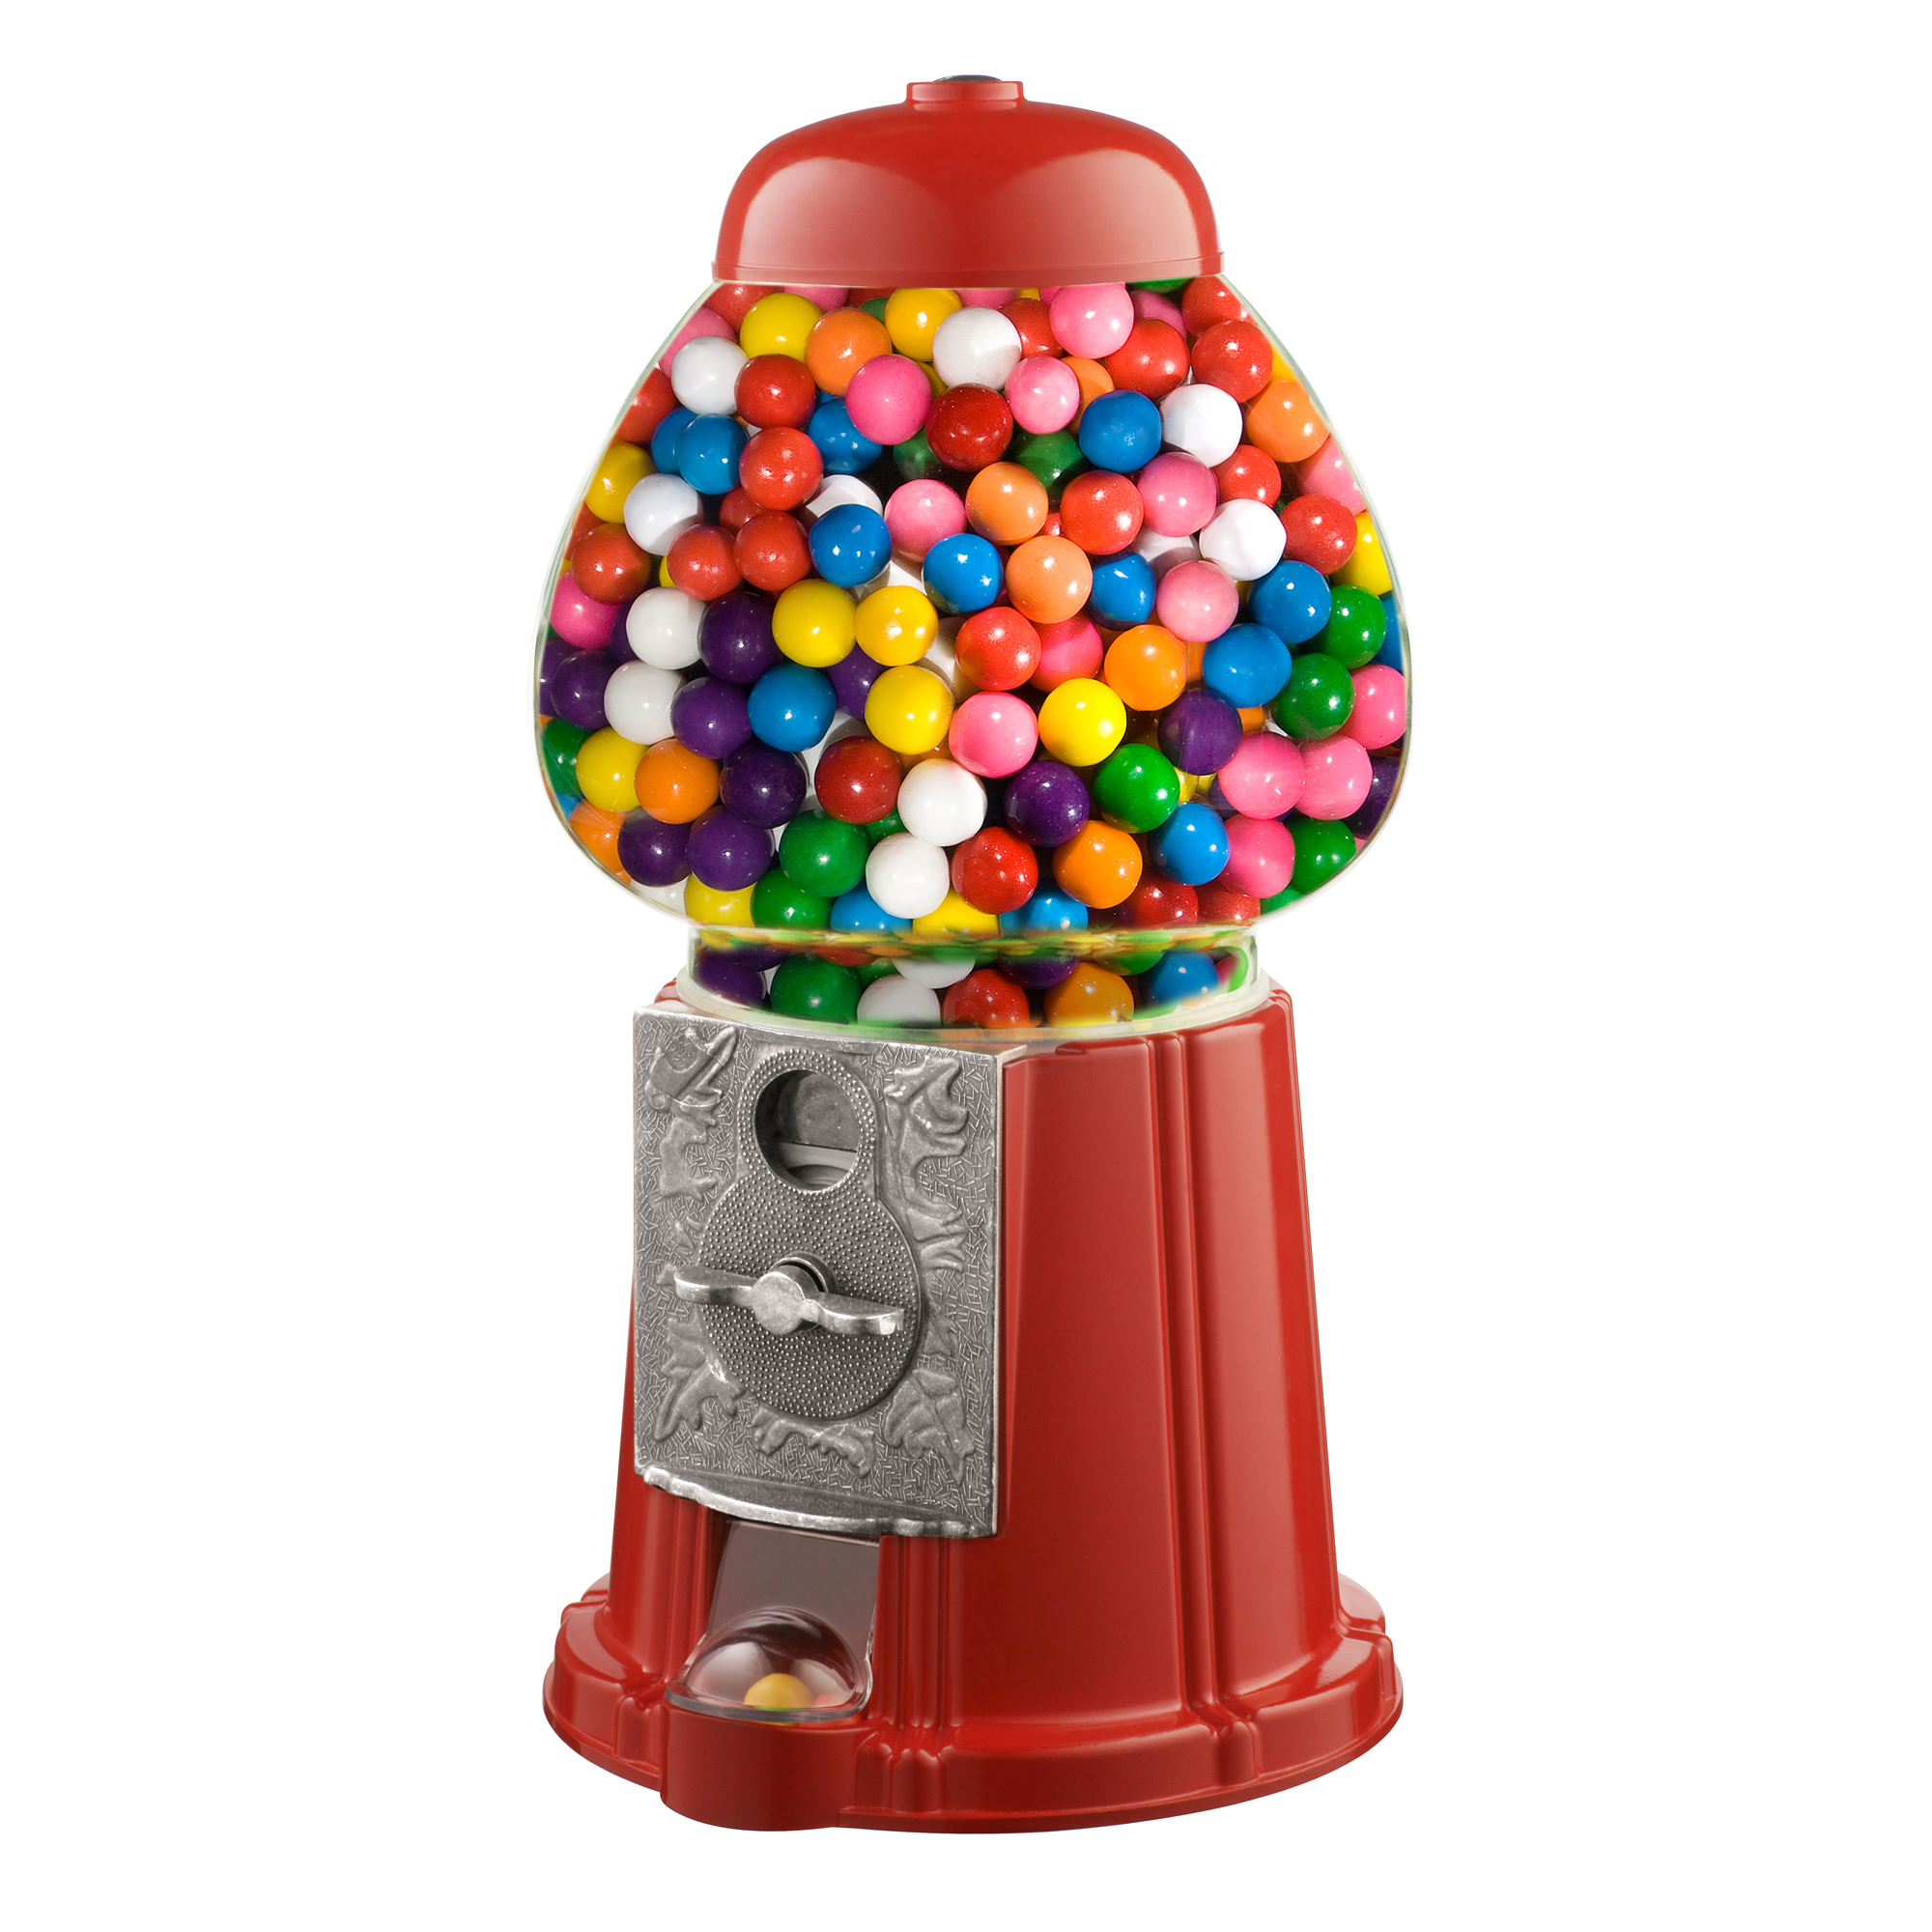 Pictures Of Gumball Machines Free Cliparts That You Can Download To